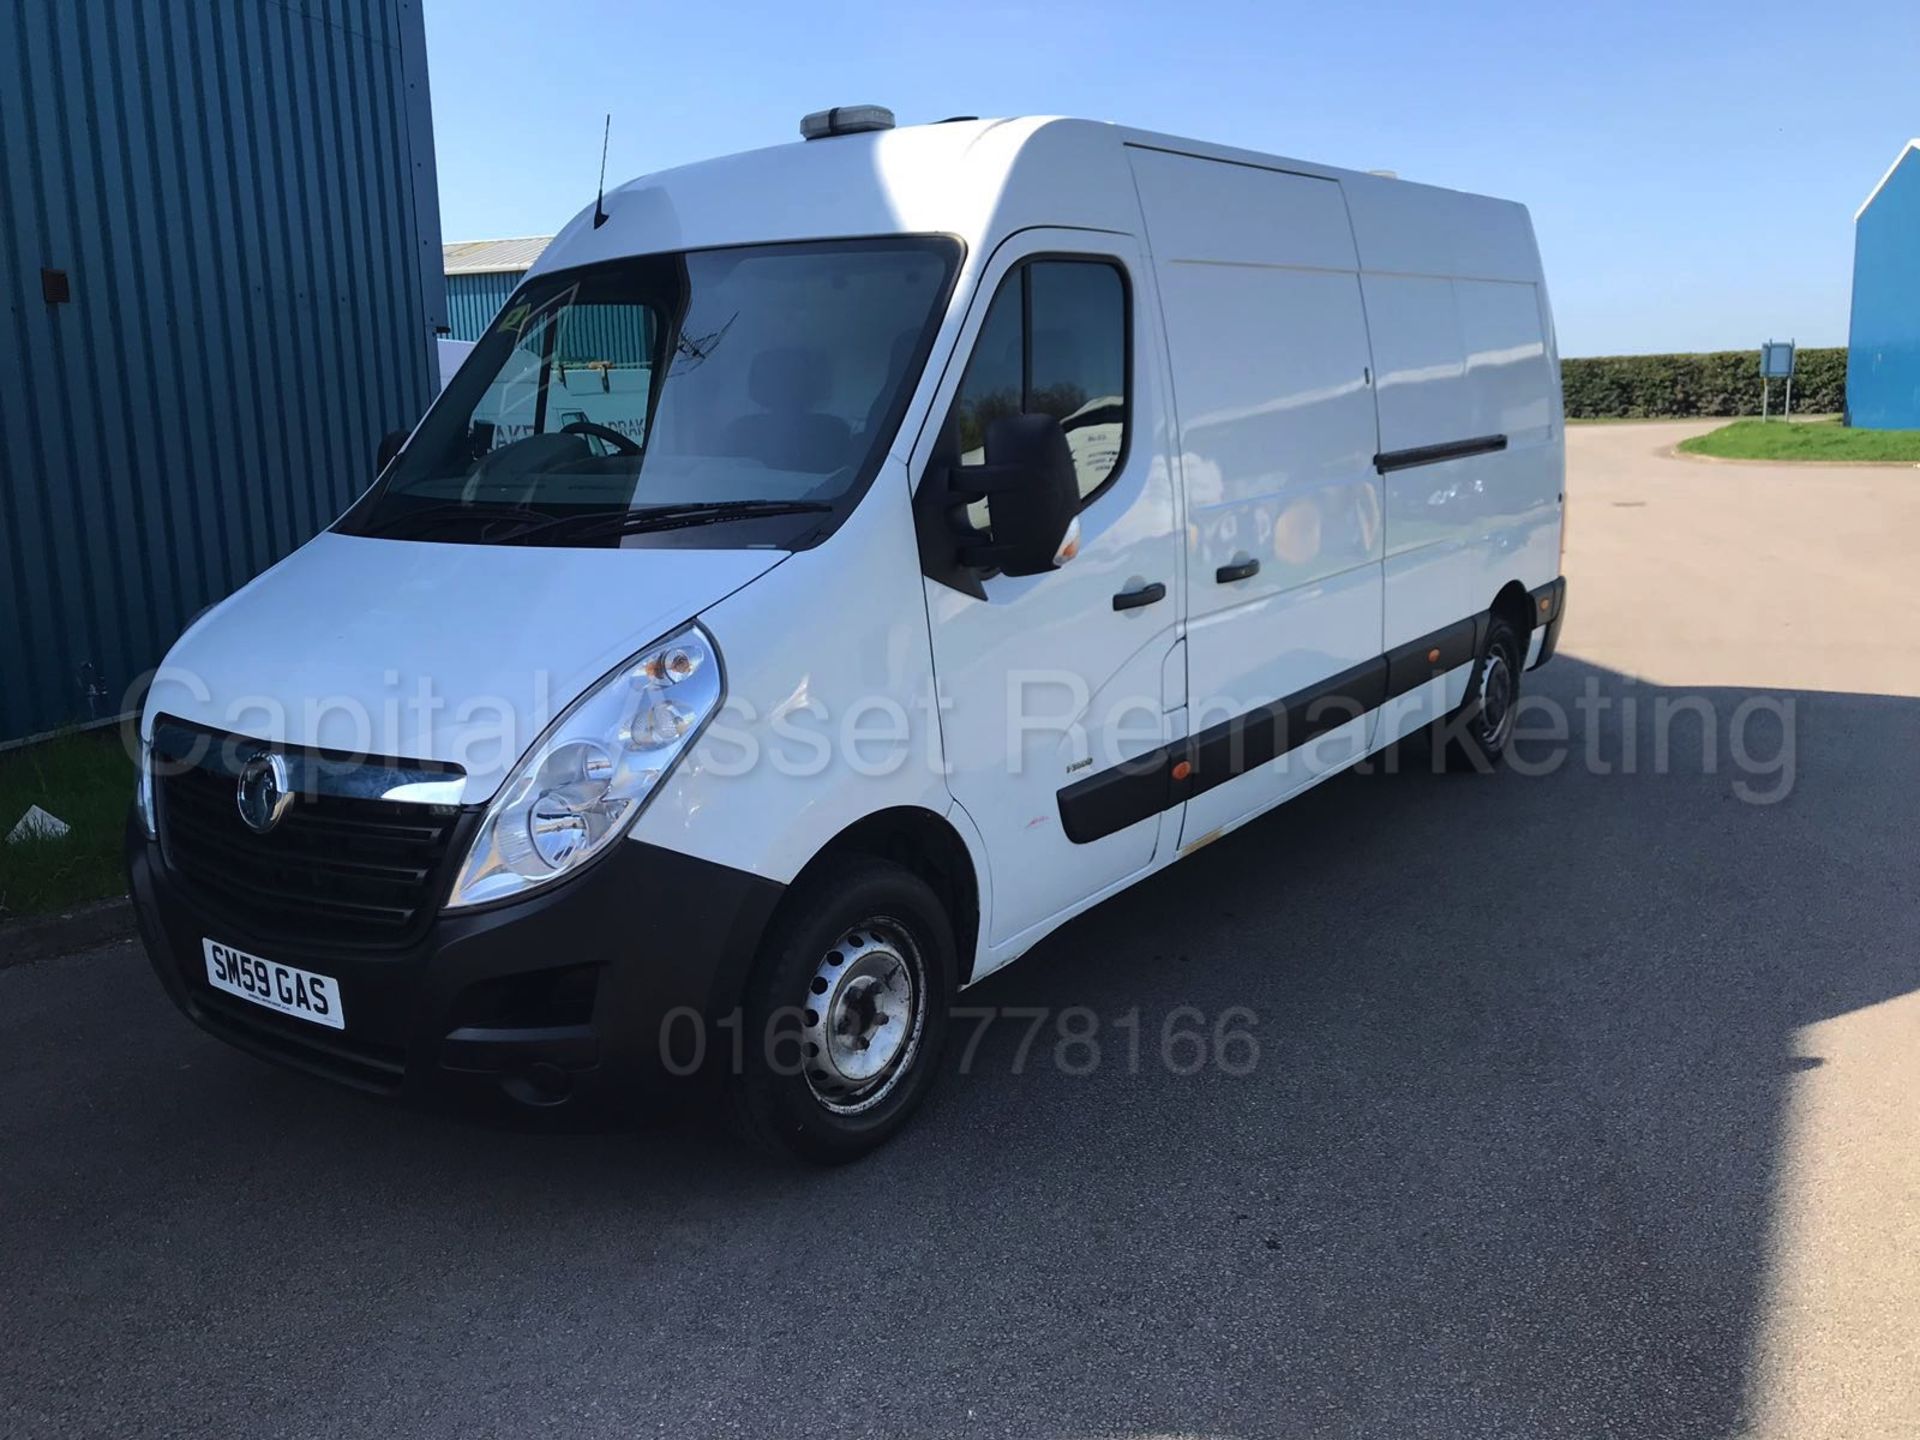 (On Sale) VAUXHALL MOVANO F3500 'LWB HI-ROOF' (2013 MODEL) '2.3 CDTI - 125 BHP - 6 SPEED' *AIR CON* - Image 4 of 21